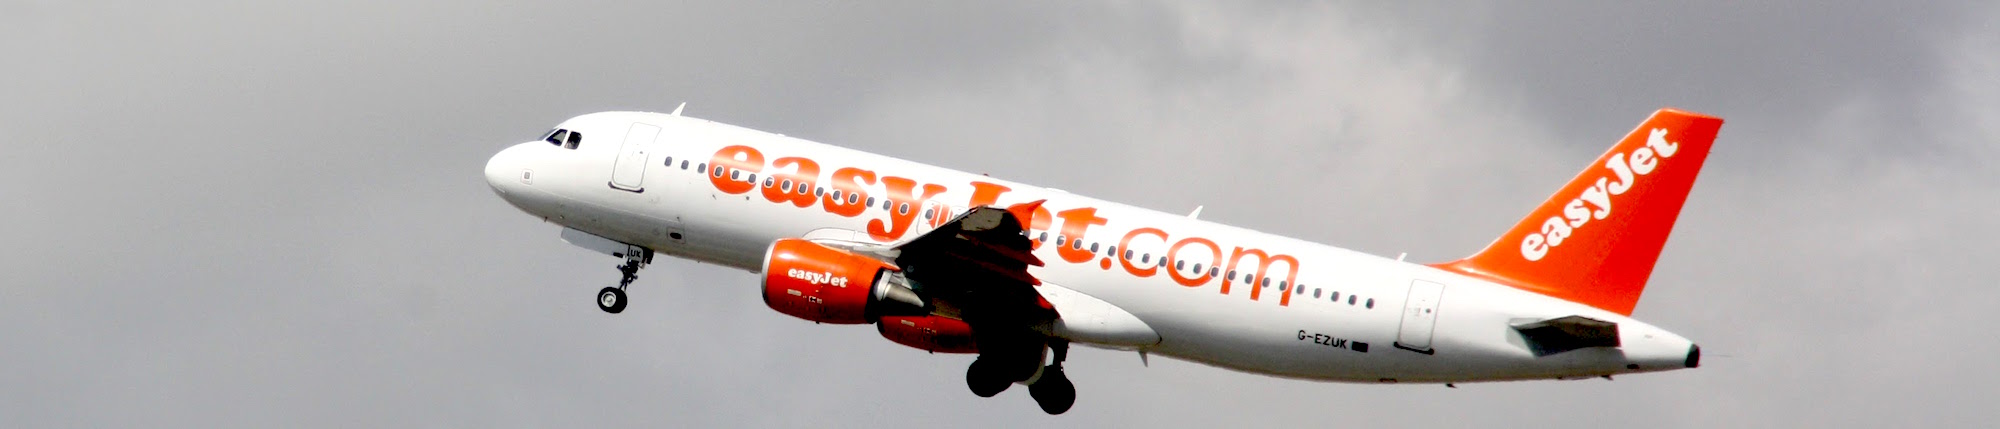 Best time to book flights for Amsterdam (AMS) to Bristol (BRS) flights with EasyJet at AirHint